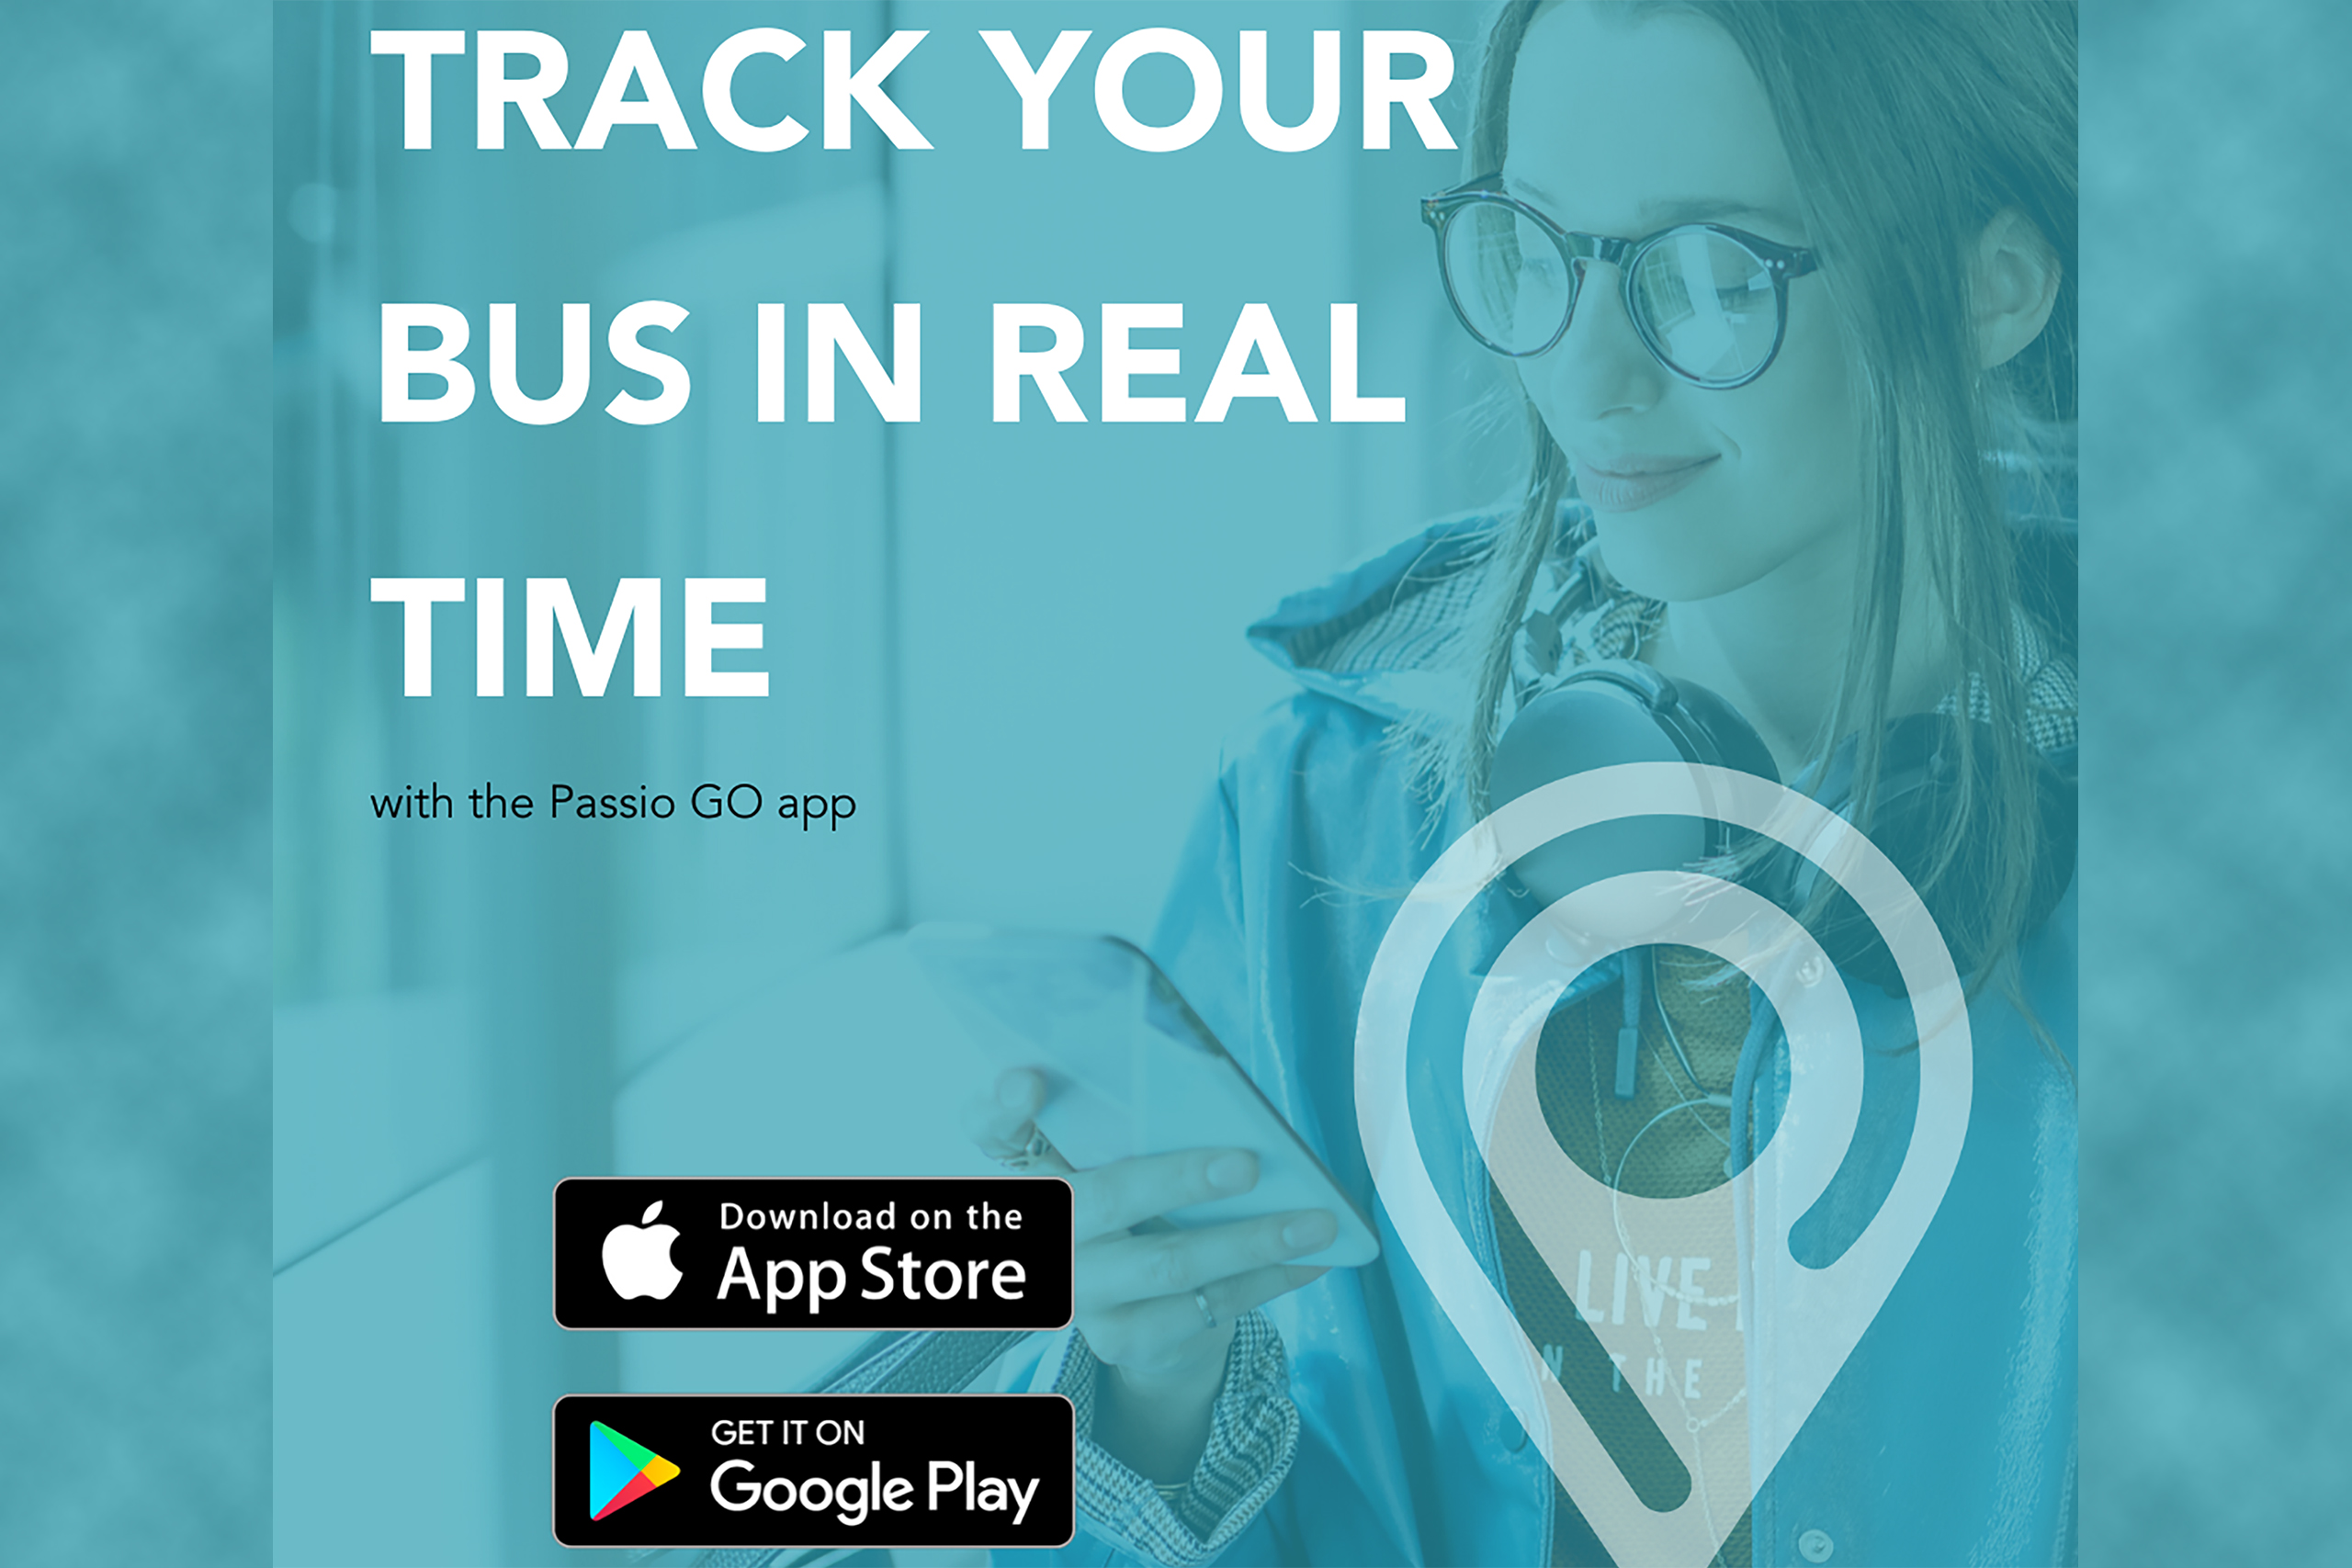 Rider Transit Launches New Mobile App and Bus Tracking System!